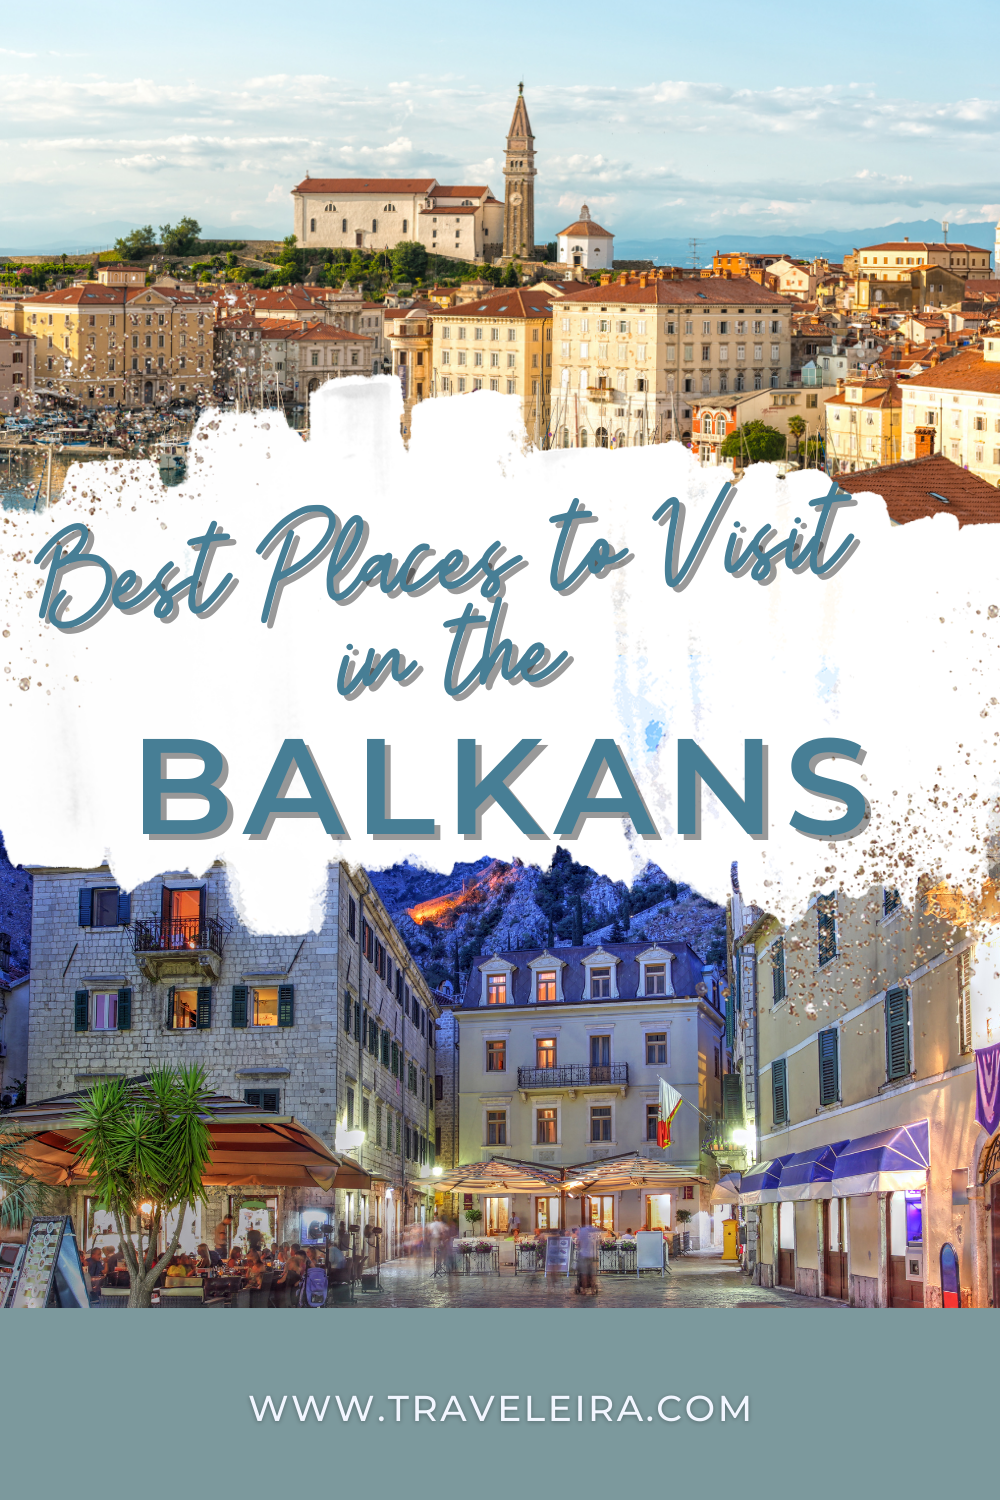 Discover the best places to visit in the Balkans according to the travel blogger who have visited these marvels.